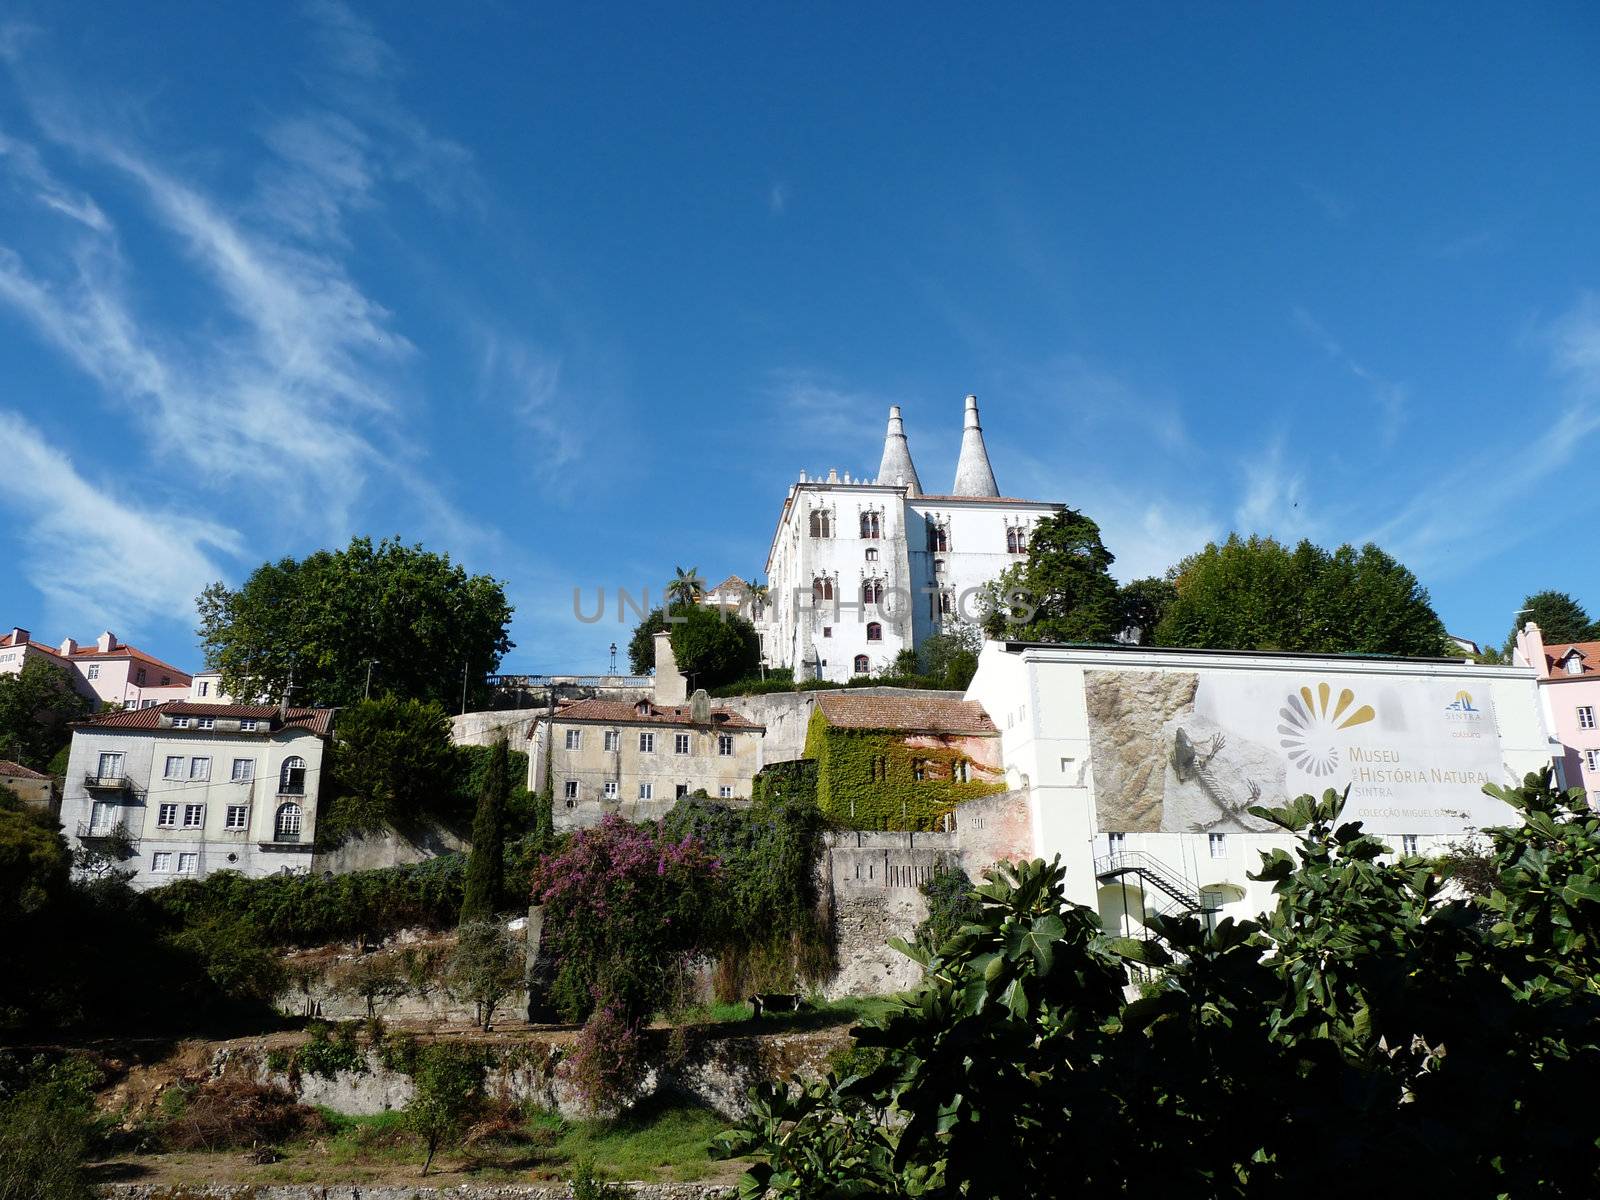 Sintra by afonsoasneves